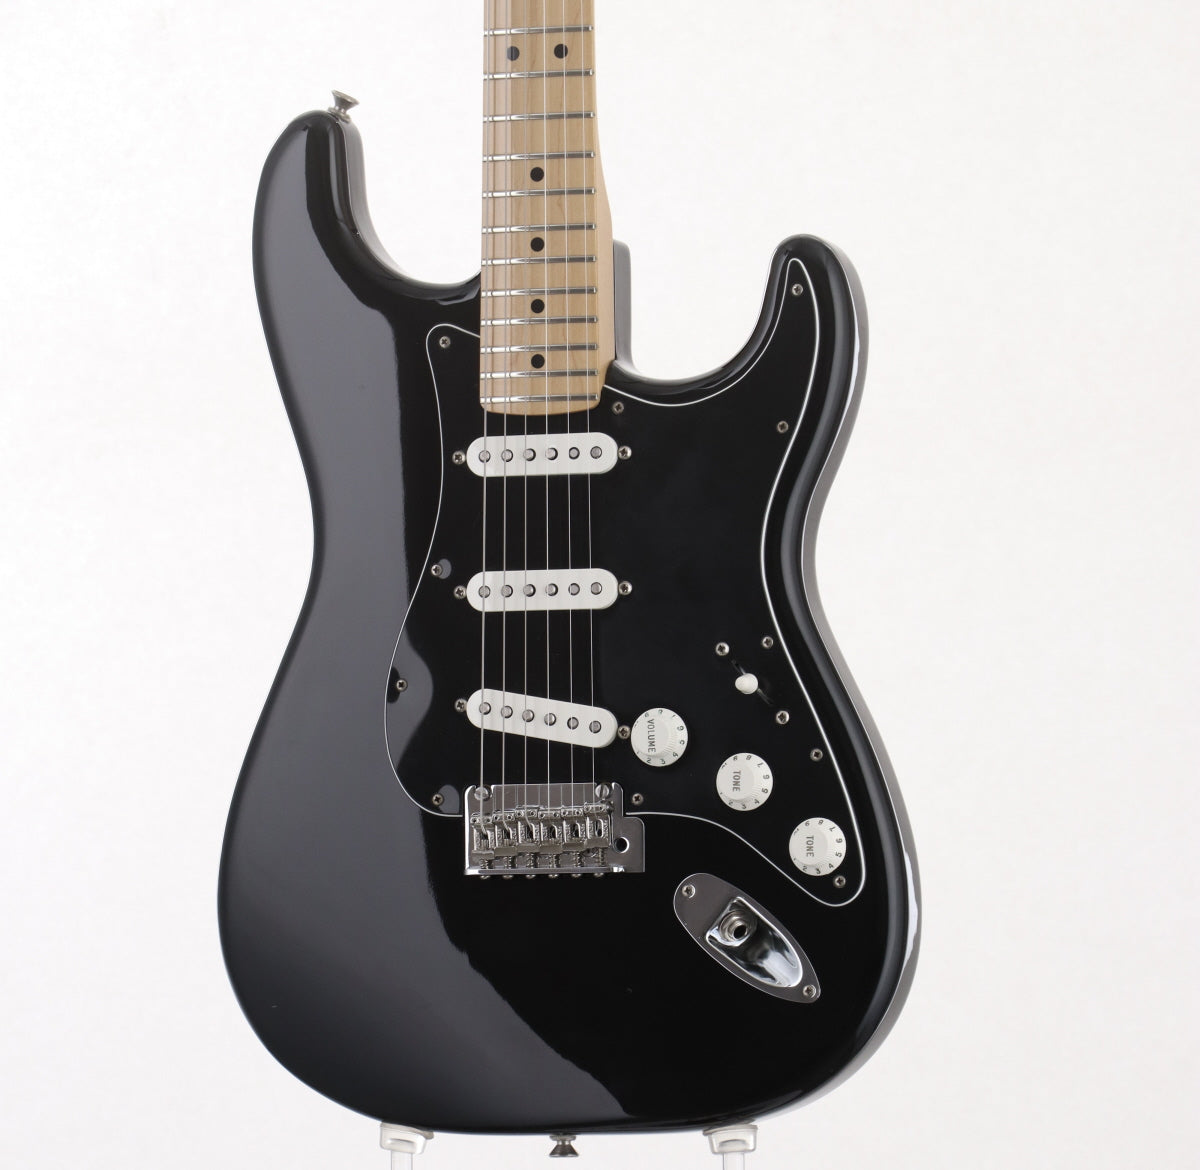 [SN MX20064947] USED Fender / Limited Edition Player Stratocaster w/Fat 50s Pickups Black [06]